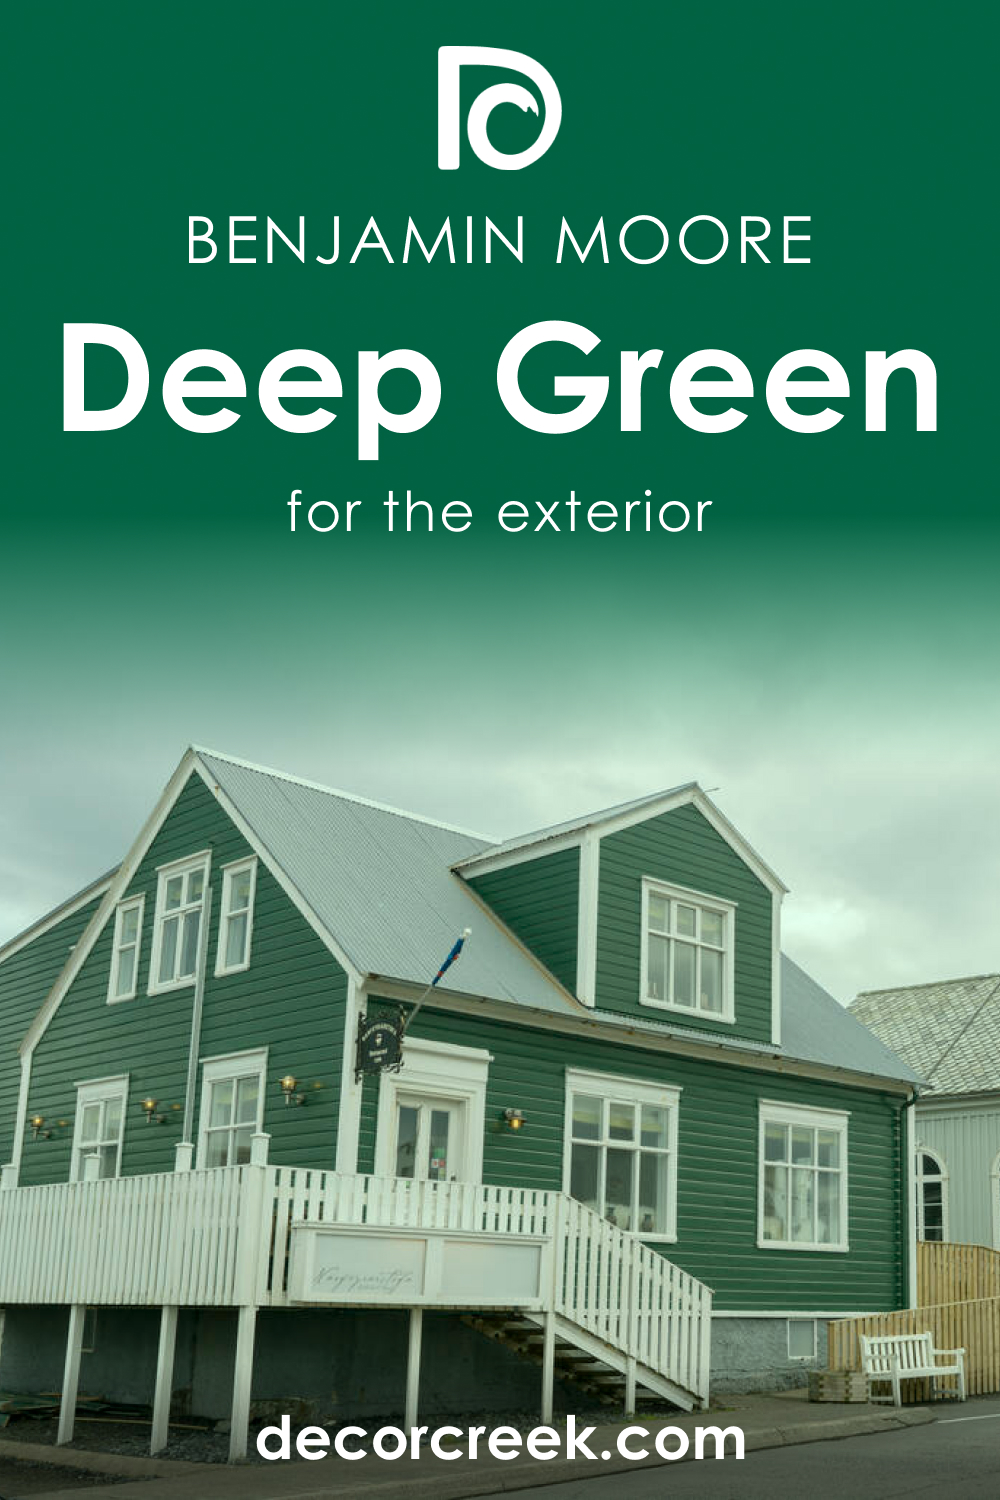 How to Use Deep Green 2039-10 for an Exterior?